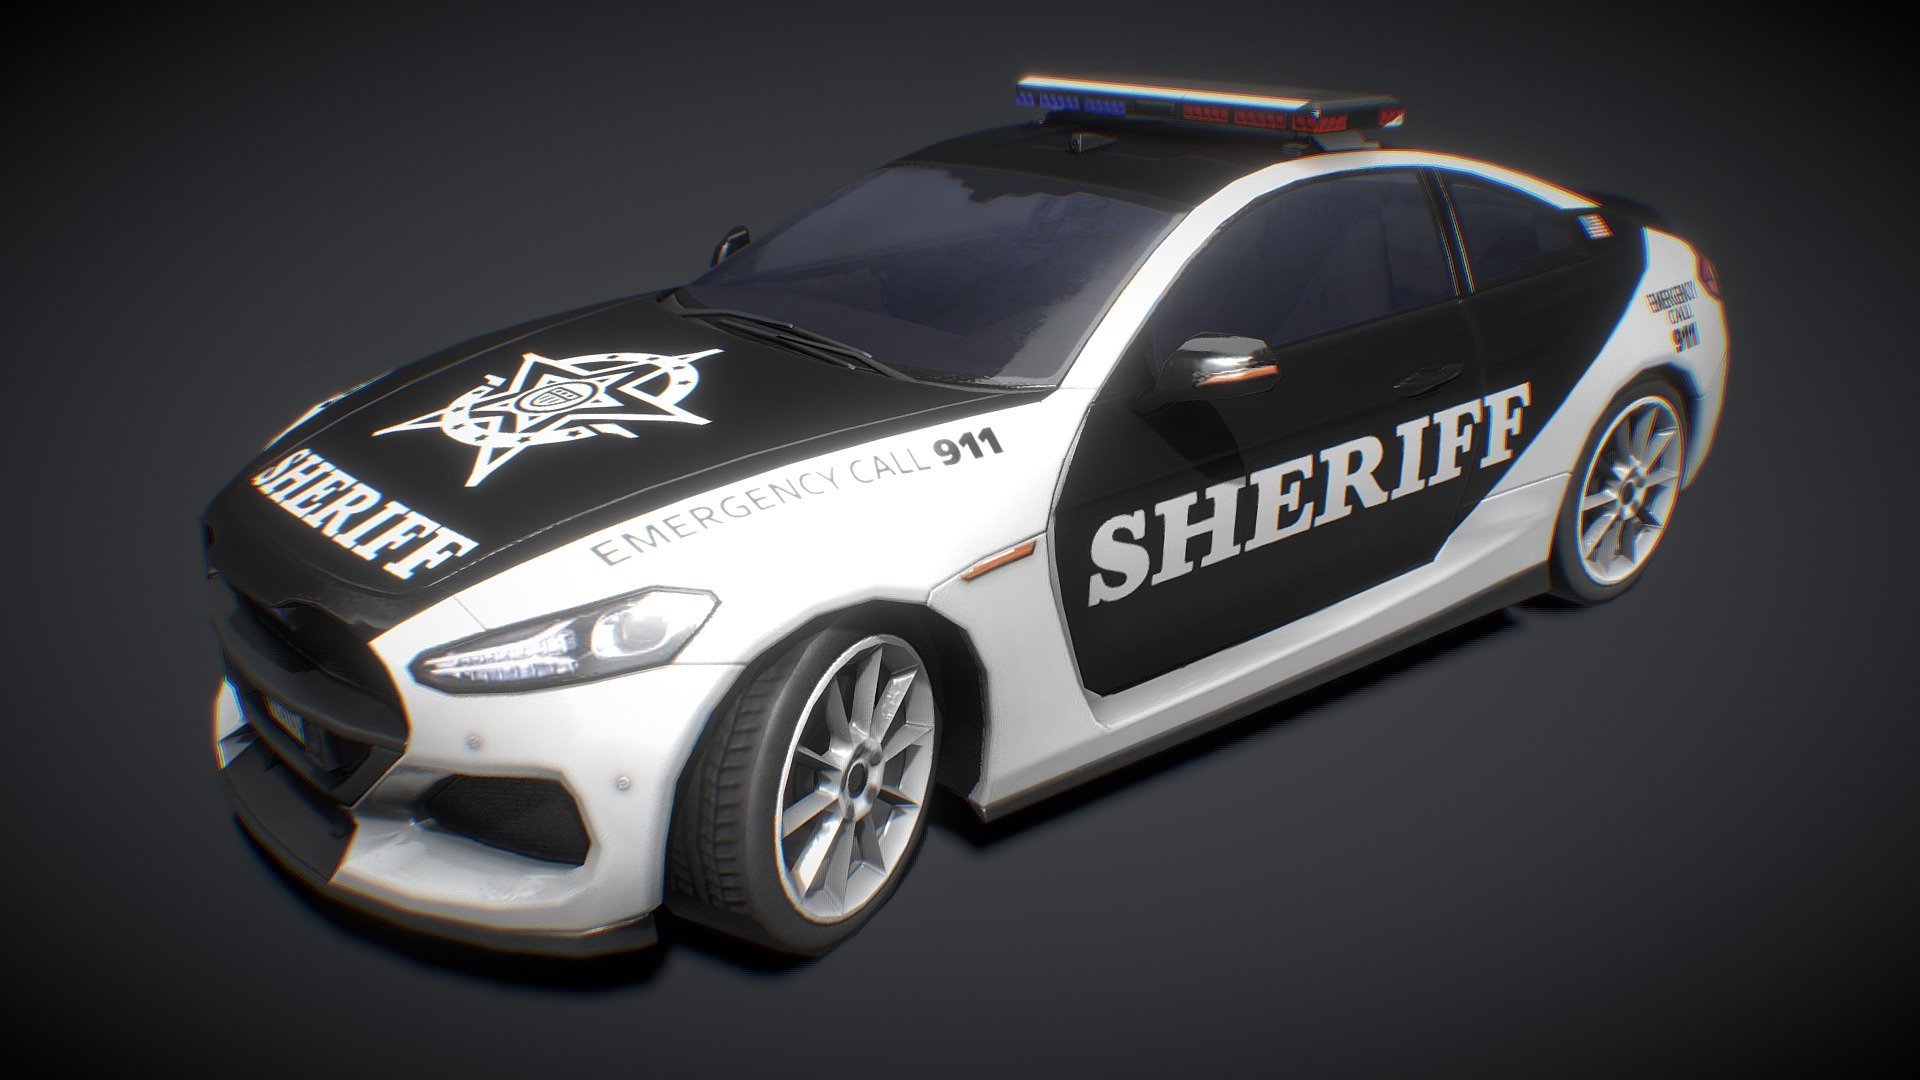 SPORT COUPE SHERIFF 2019

Low-Poly model for the game and VFX

Tris 4,569

https://boosty.to/tsb3dmodels - SPORT COUPE SHERIFF 2019 - Buy Royalty Free 3D model by TSB3DMODELS 3d model